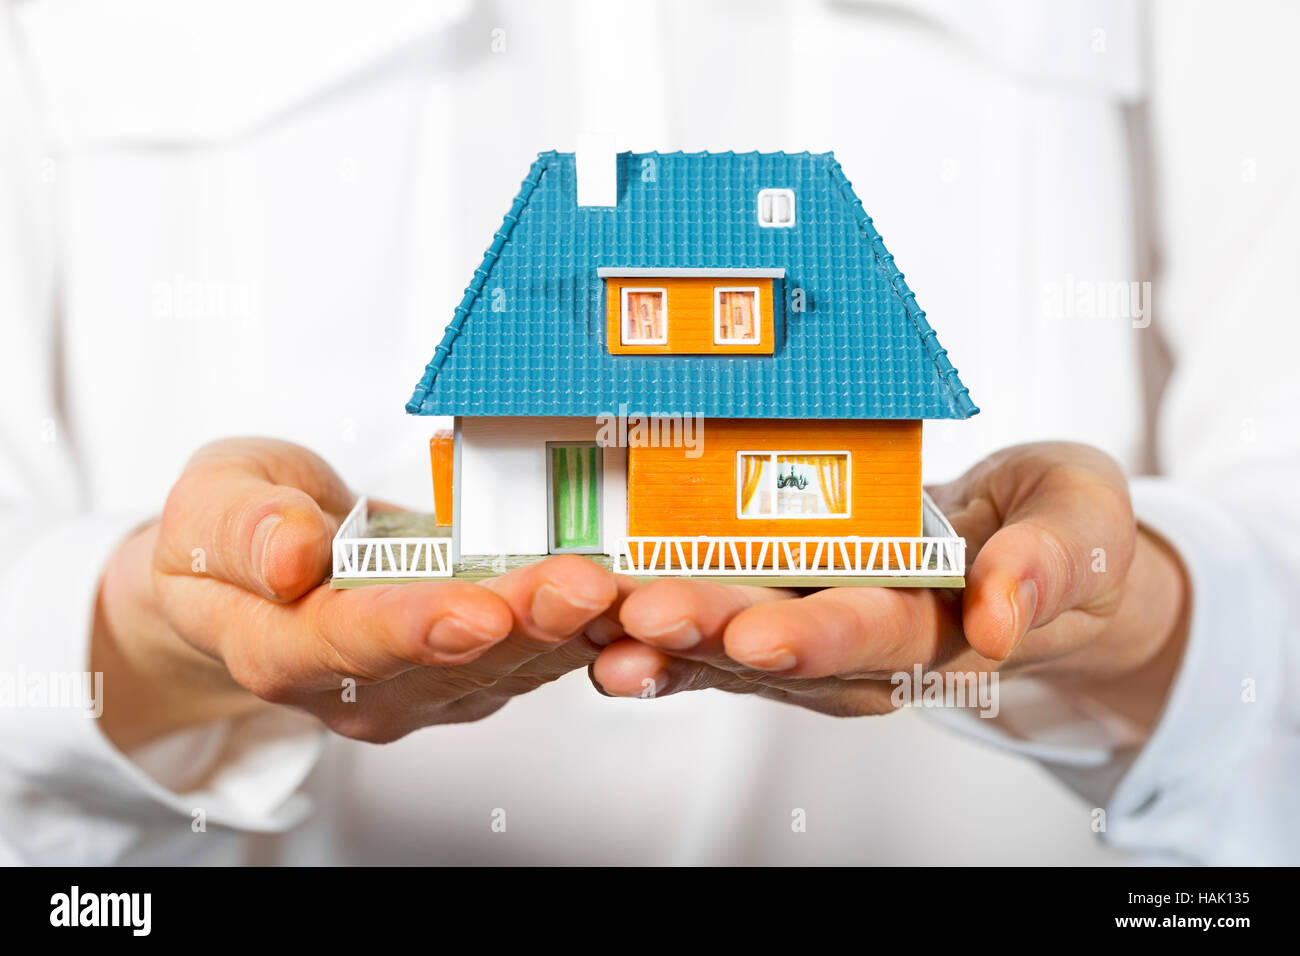 house in human hands, concept of new real estate Stock Photo